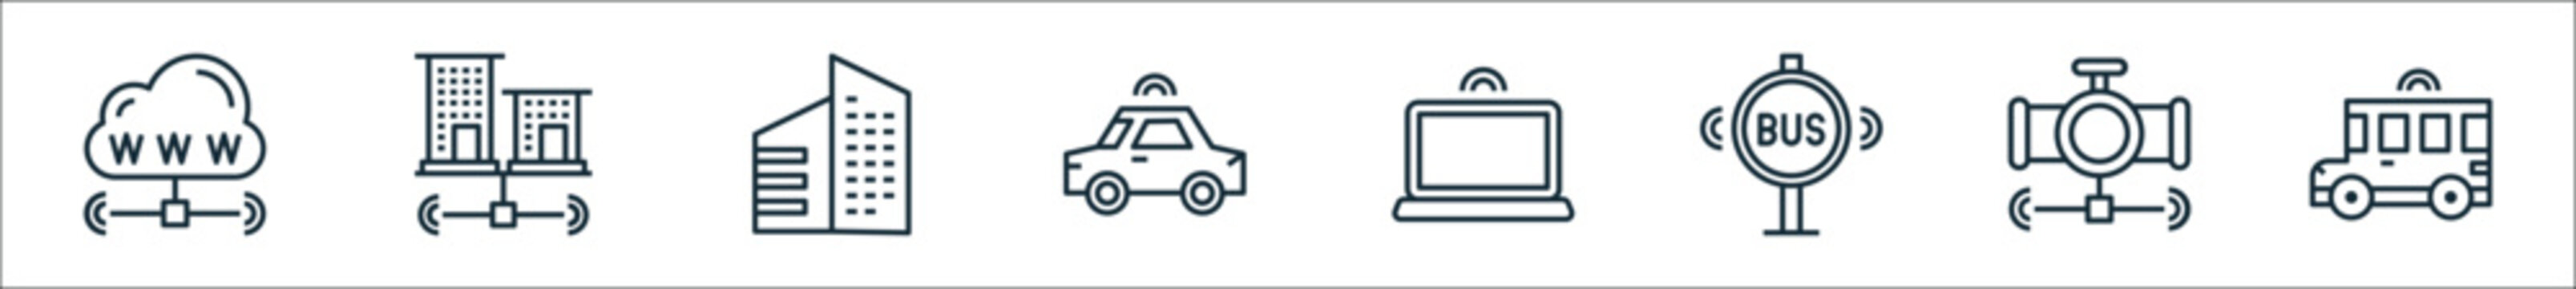 outline set of internet of things line icons. linear vector icons such as www, building, building, smart car, smartphone, bus stop, leak, bus